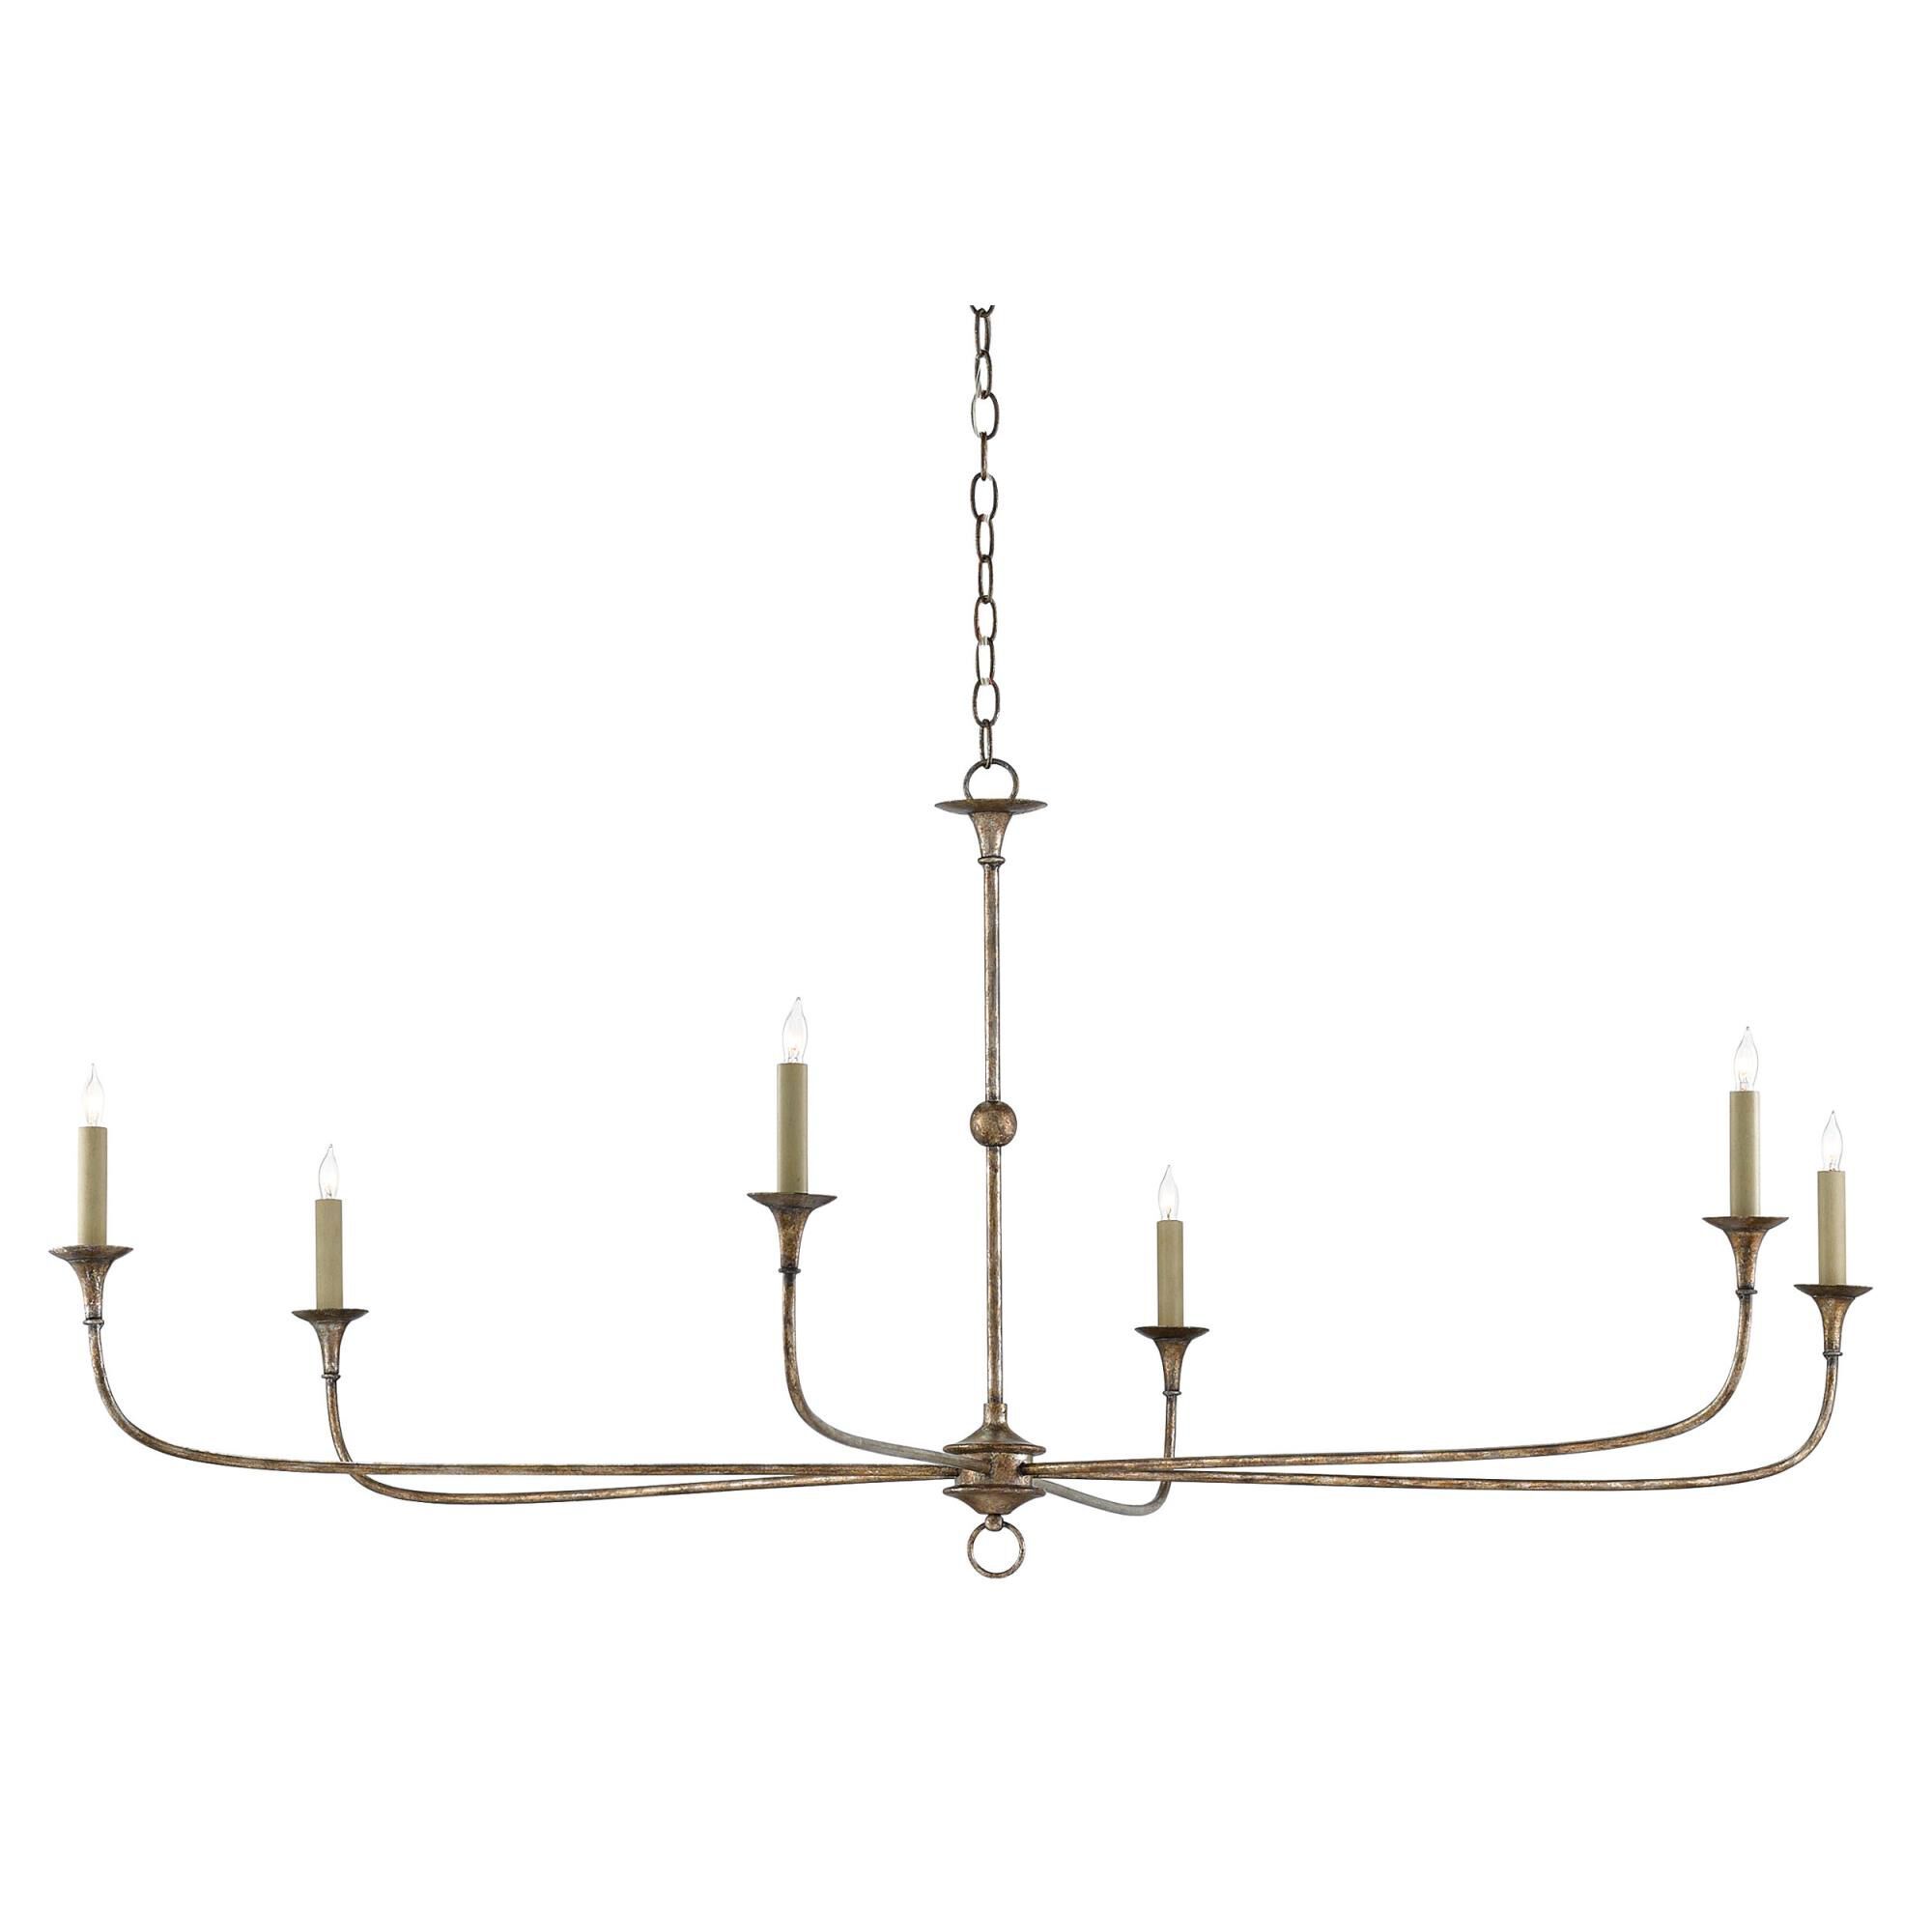 New


Nottaway 61 Inch 6 Light Chandelier by Currey and Company

Capitol ID: 2169749
MFR SKU: 900... | 1800 Lighting